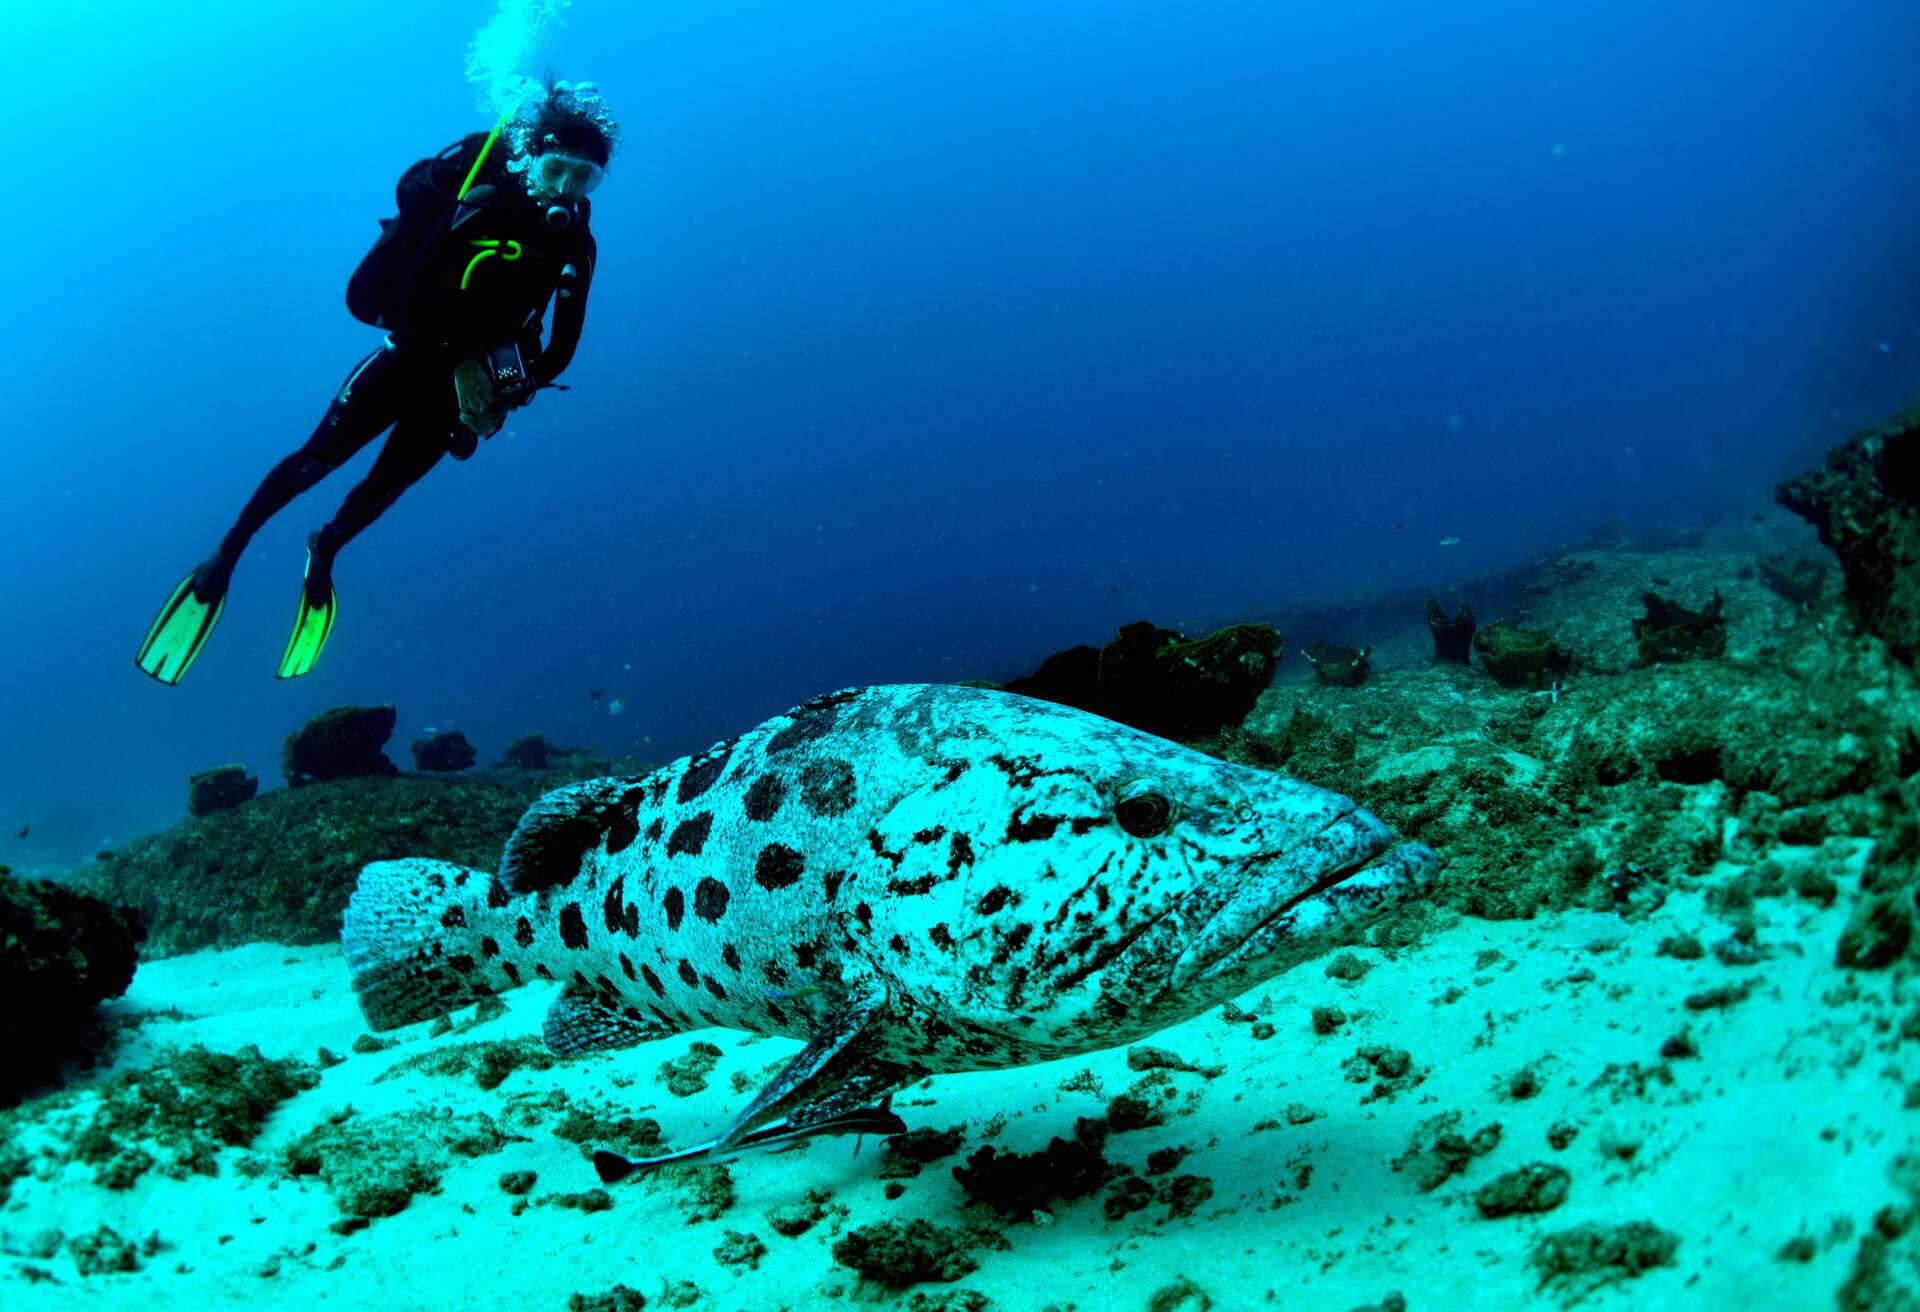 A scuba diver girl swims close to a giant grouper fish in Mozambique's Indian Ocean.